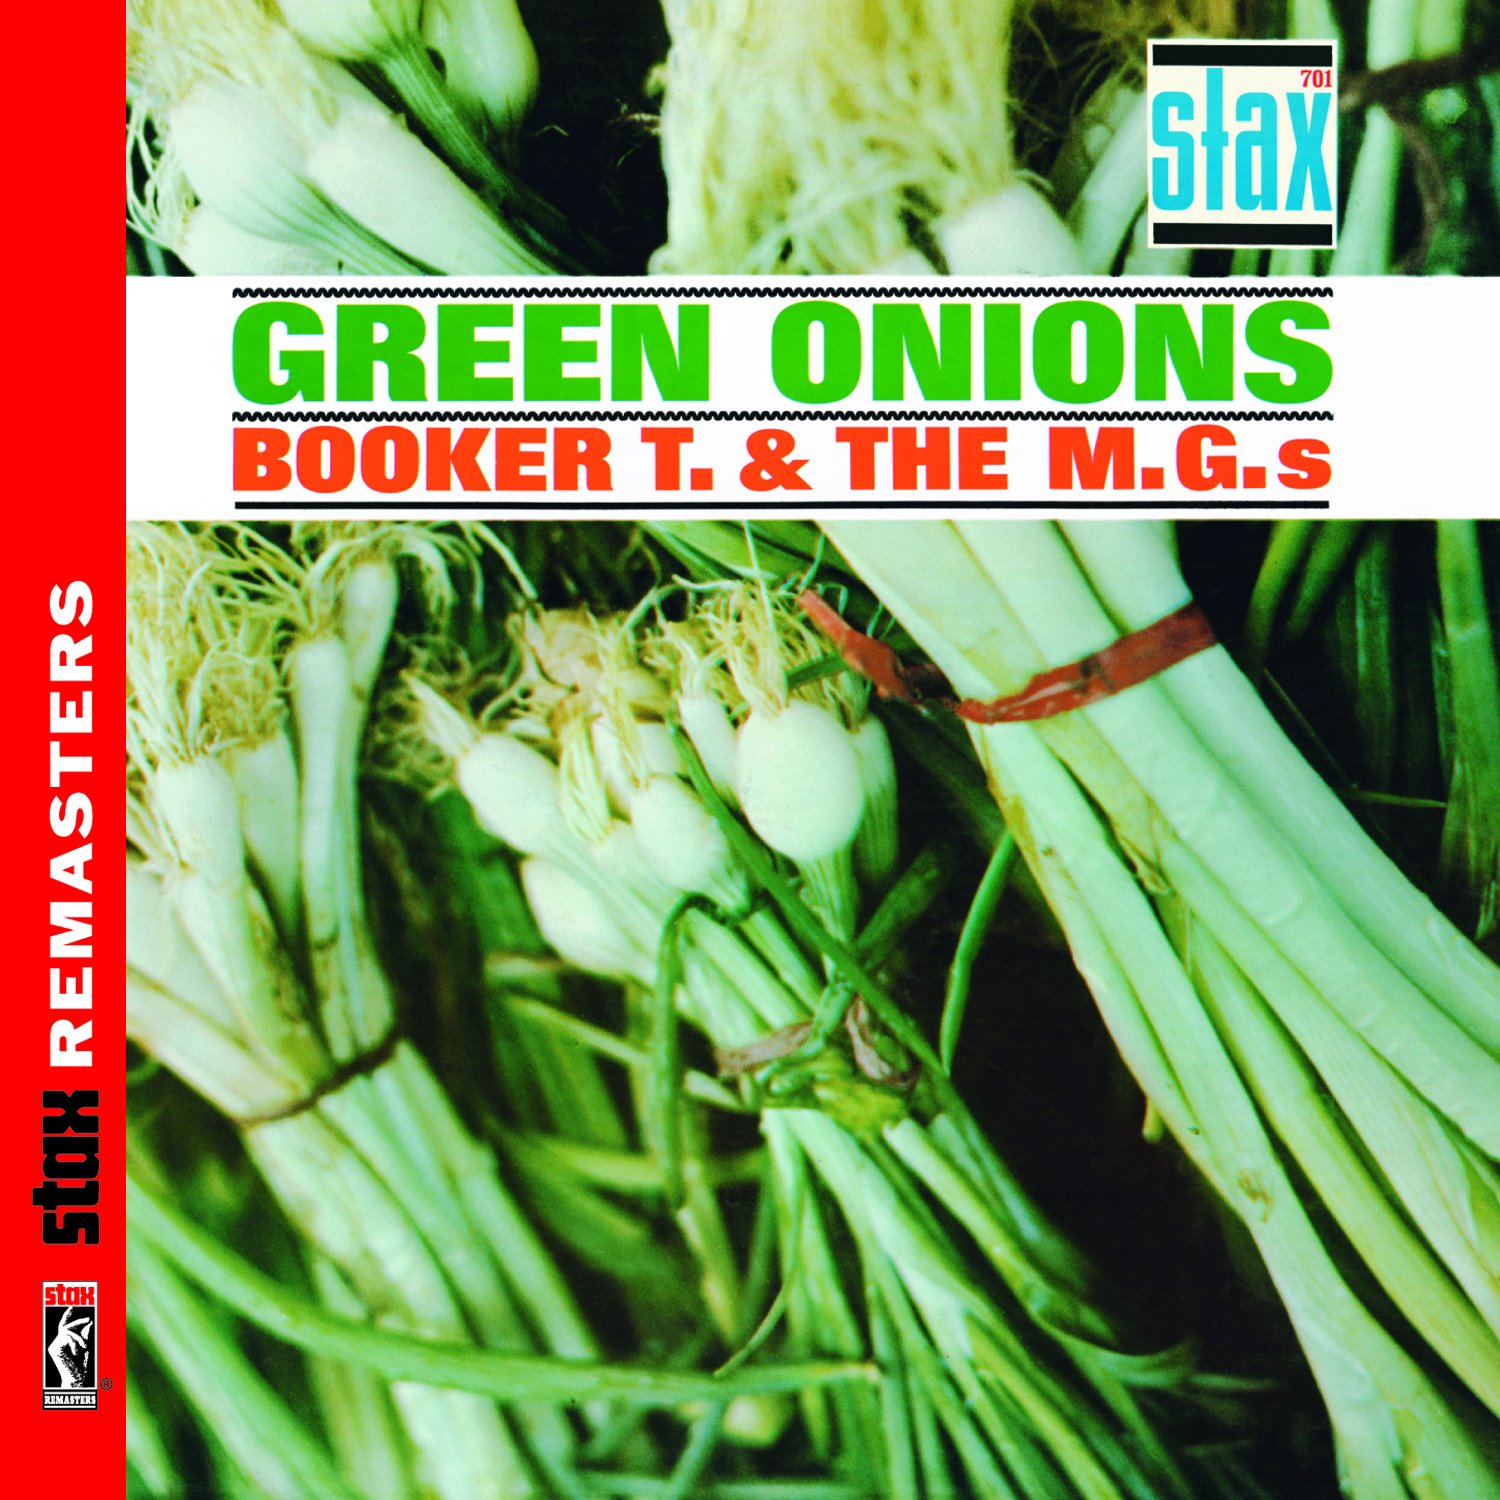 Booker T. & The MG’s - Green Onions Deluxe (60th Anniversary)